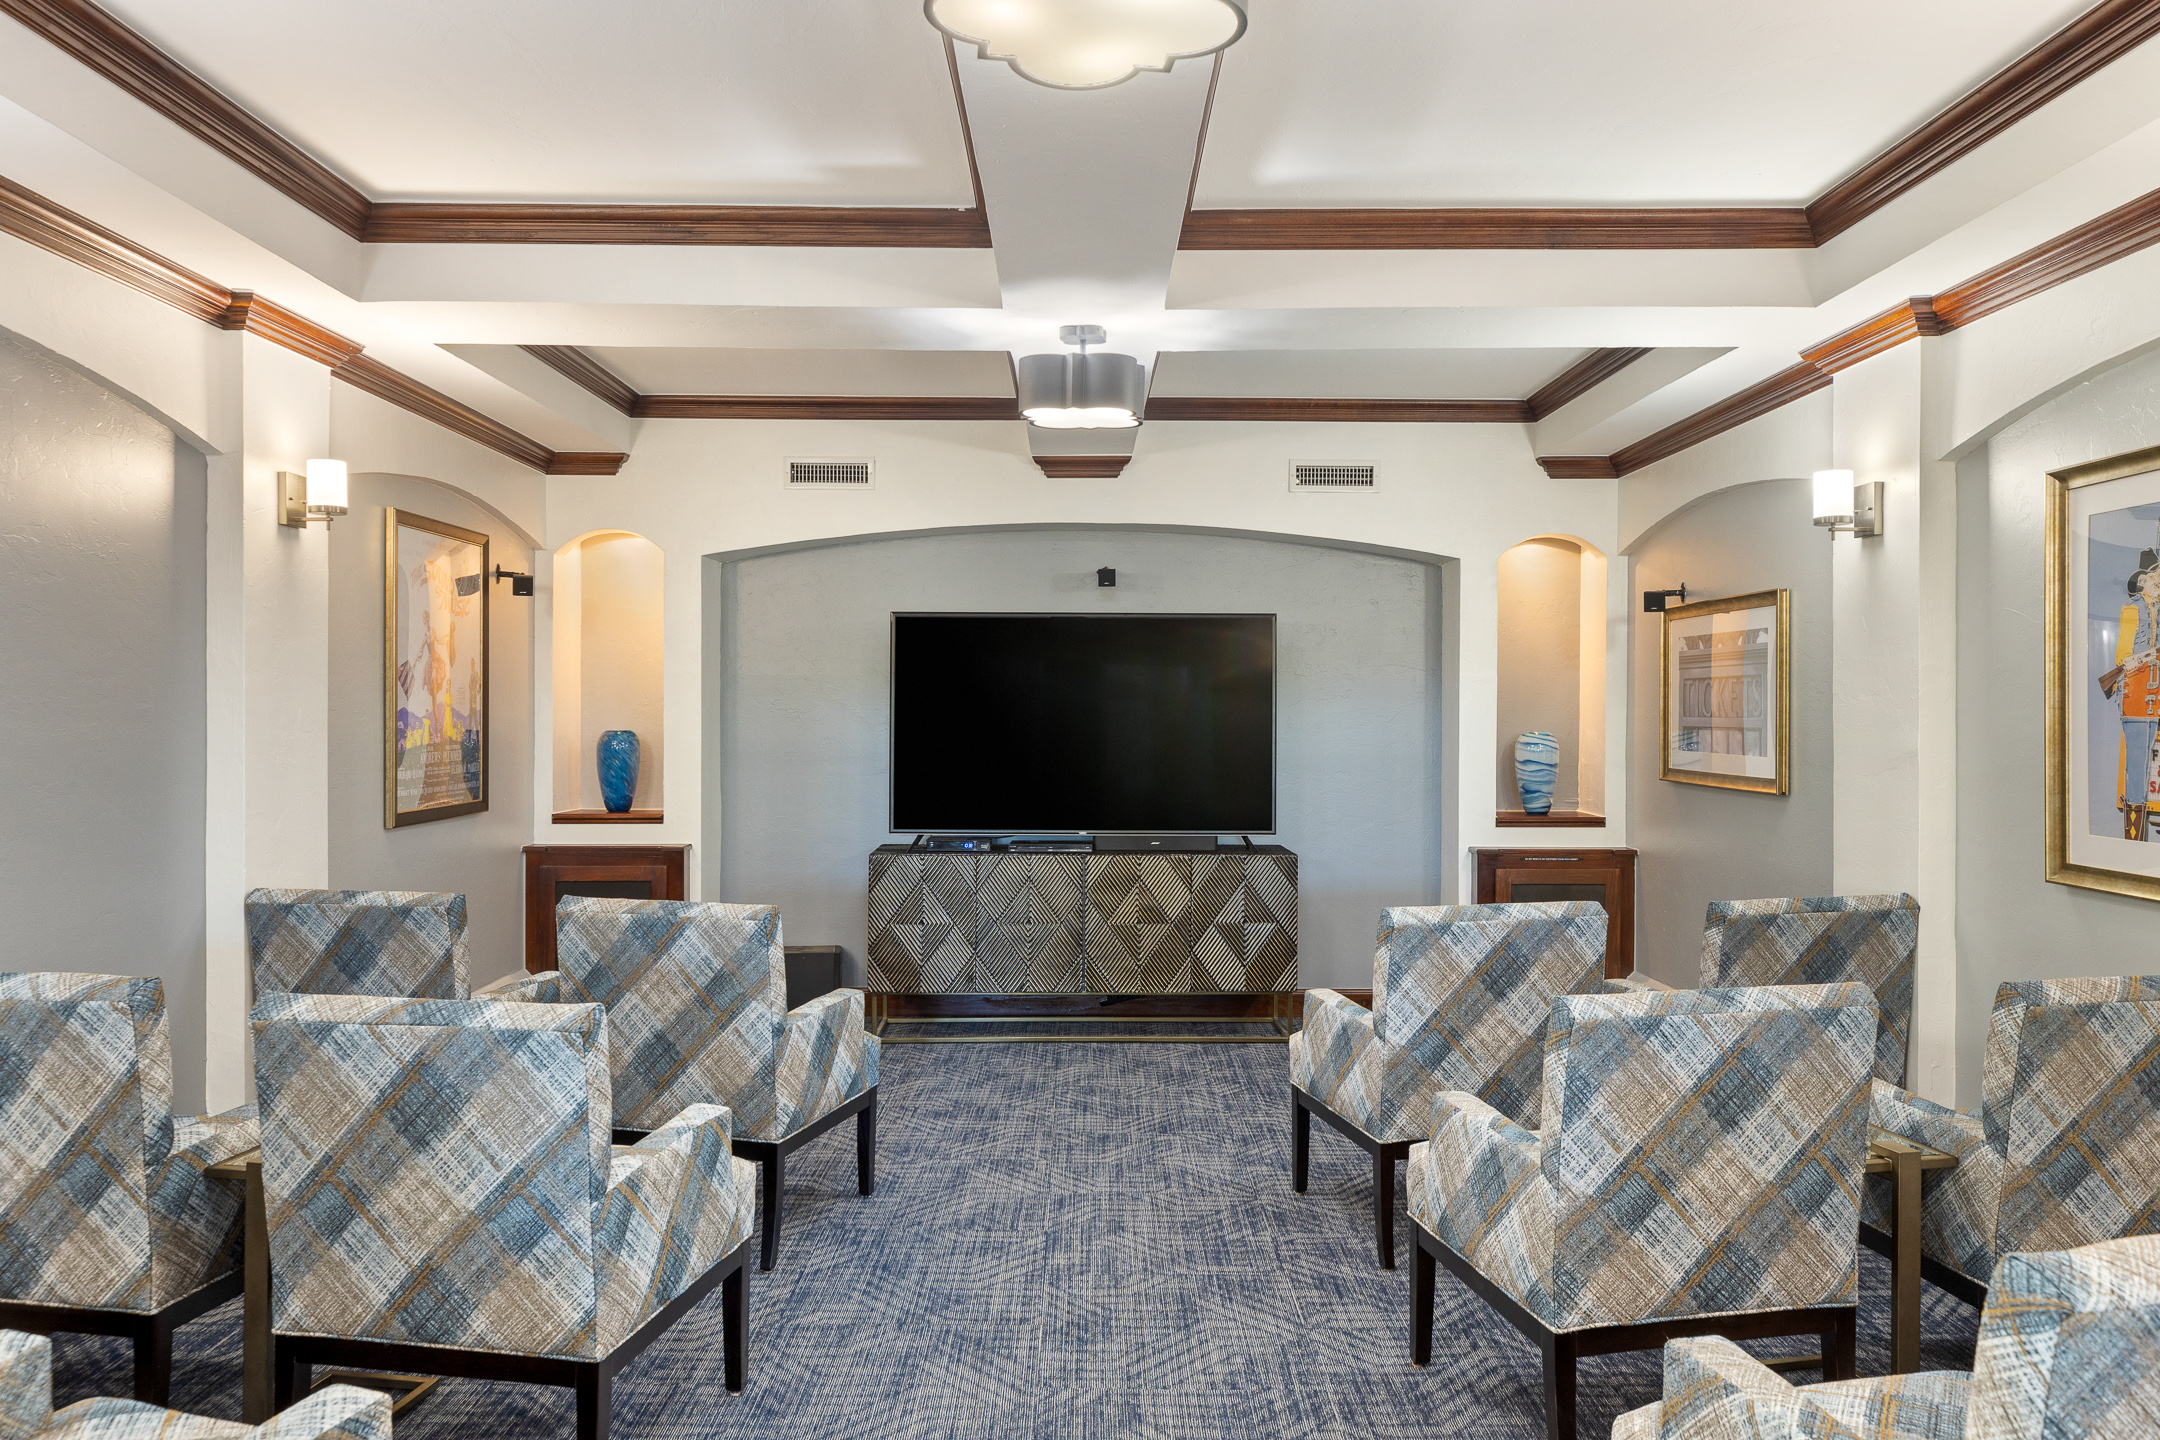 A big room is filled with chairs and a large TV hangs at the front in the TV Room of Overview of Grace Pointe Senior Living Community in Oklahoma.